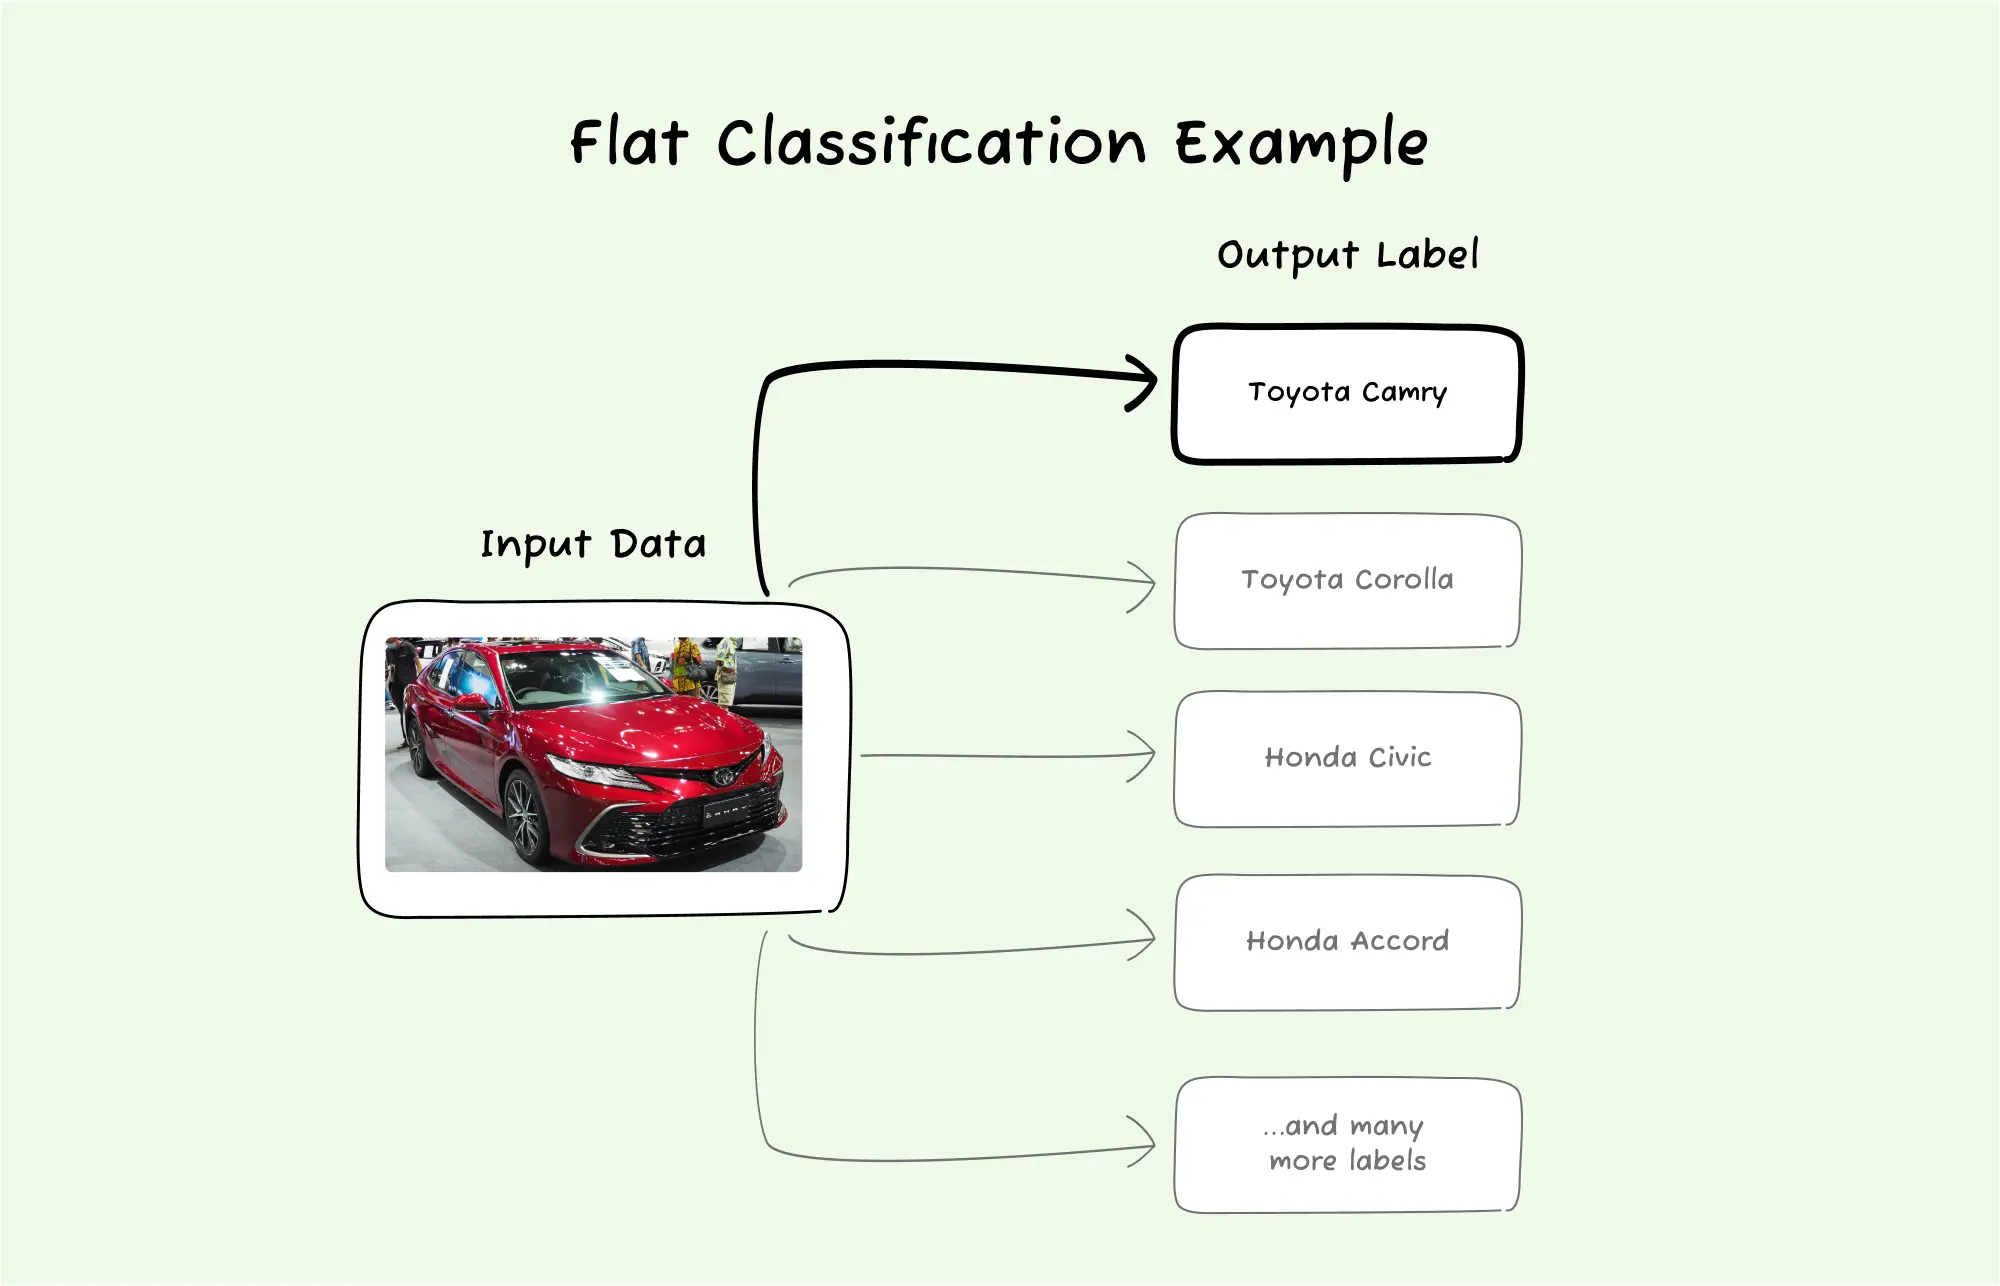 Flat image classification example